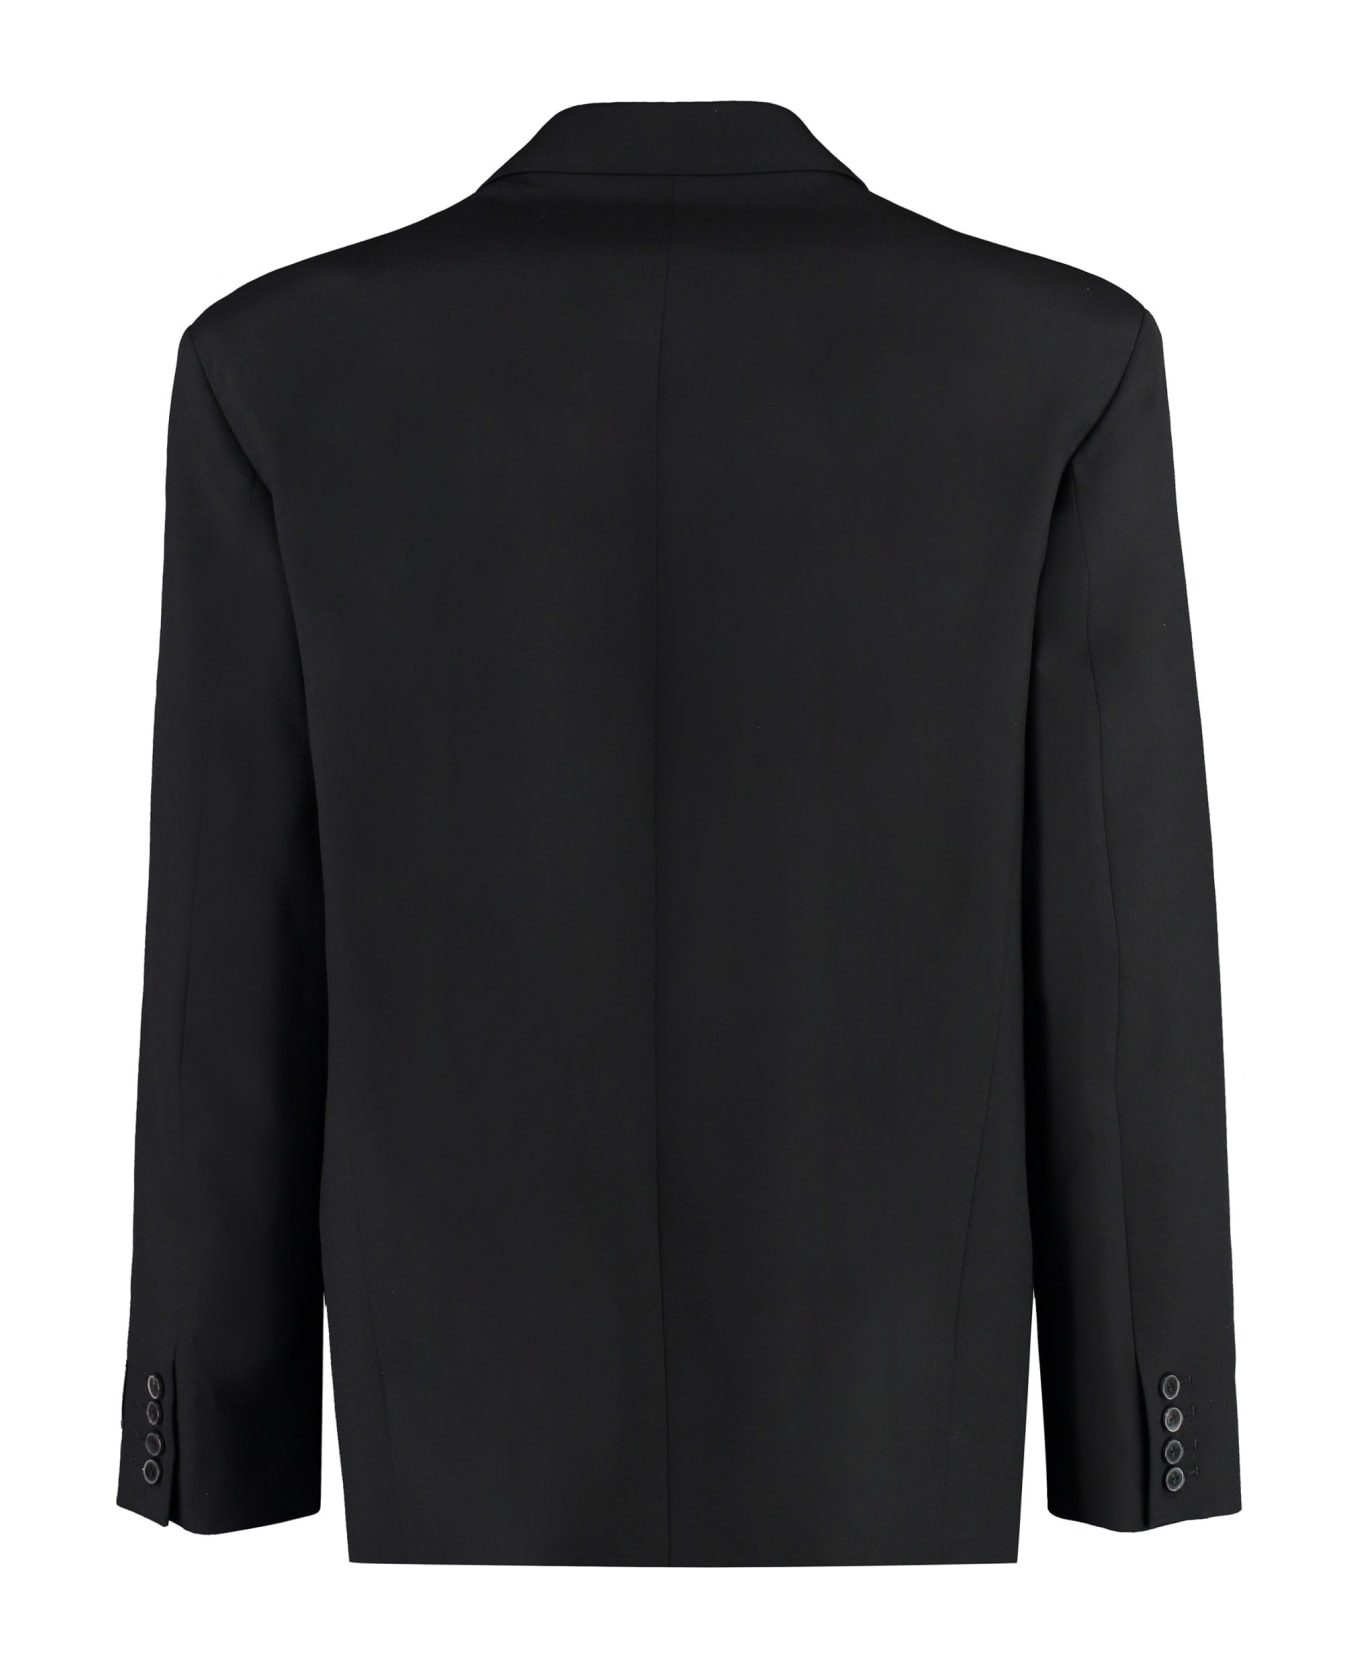 Valentino Double-breasted Wool Blazer - black ブレザー